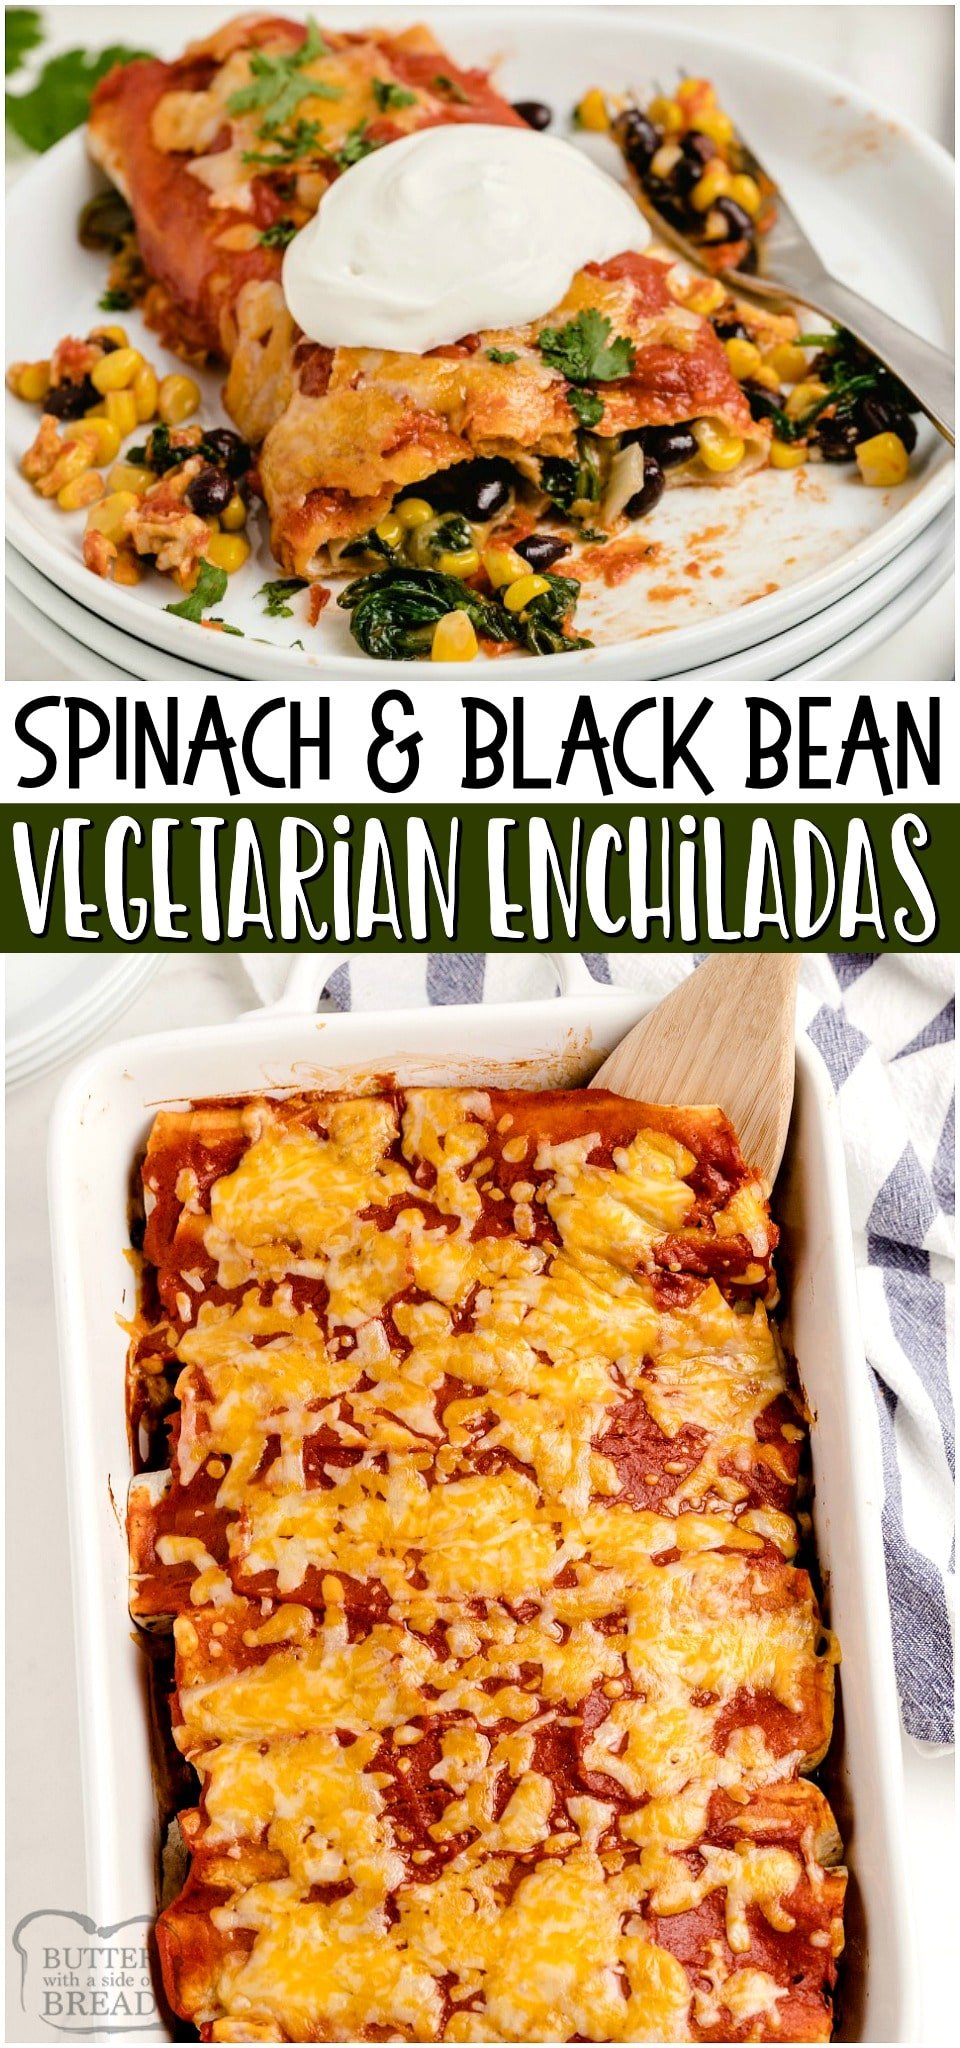 Vegetarian enchiladas with spinach are as healthy as they are delicious. These black bean enchiladas are packed with flavor and smothered in a homemade enchiladas sauce.